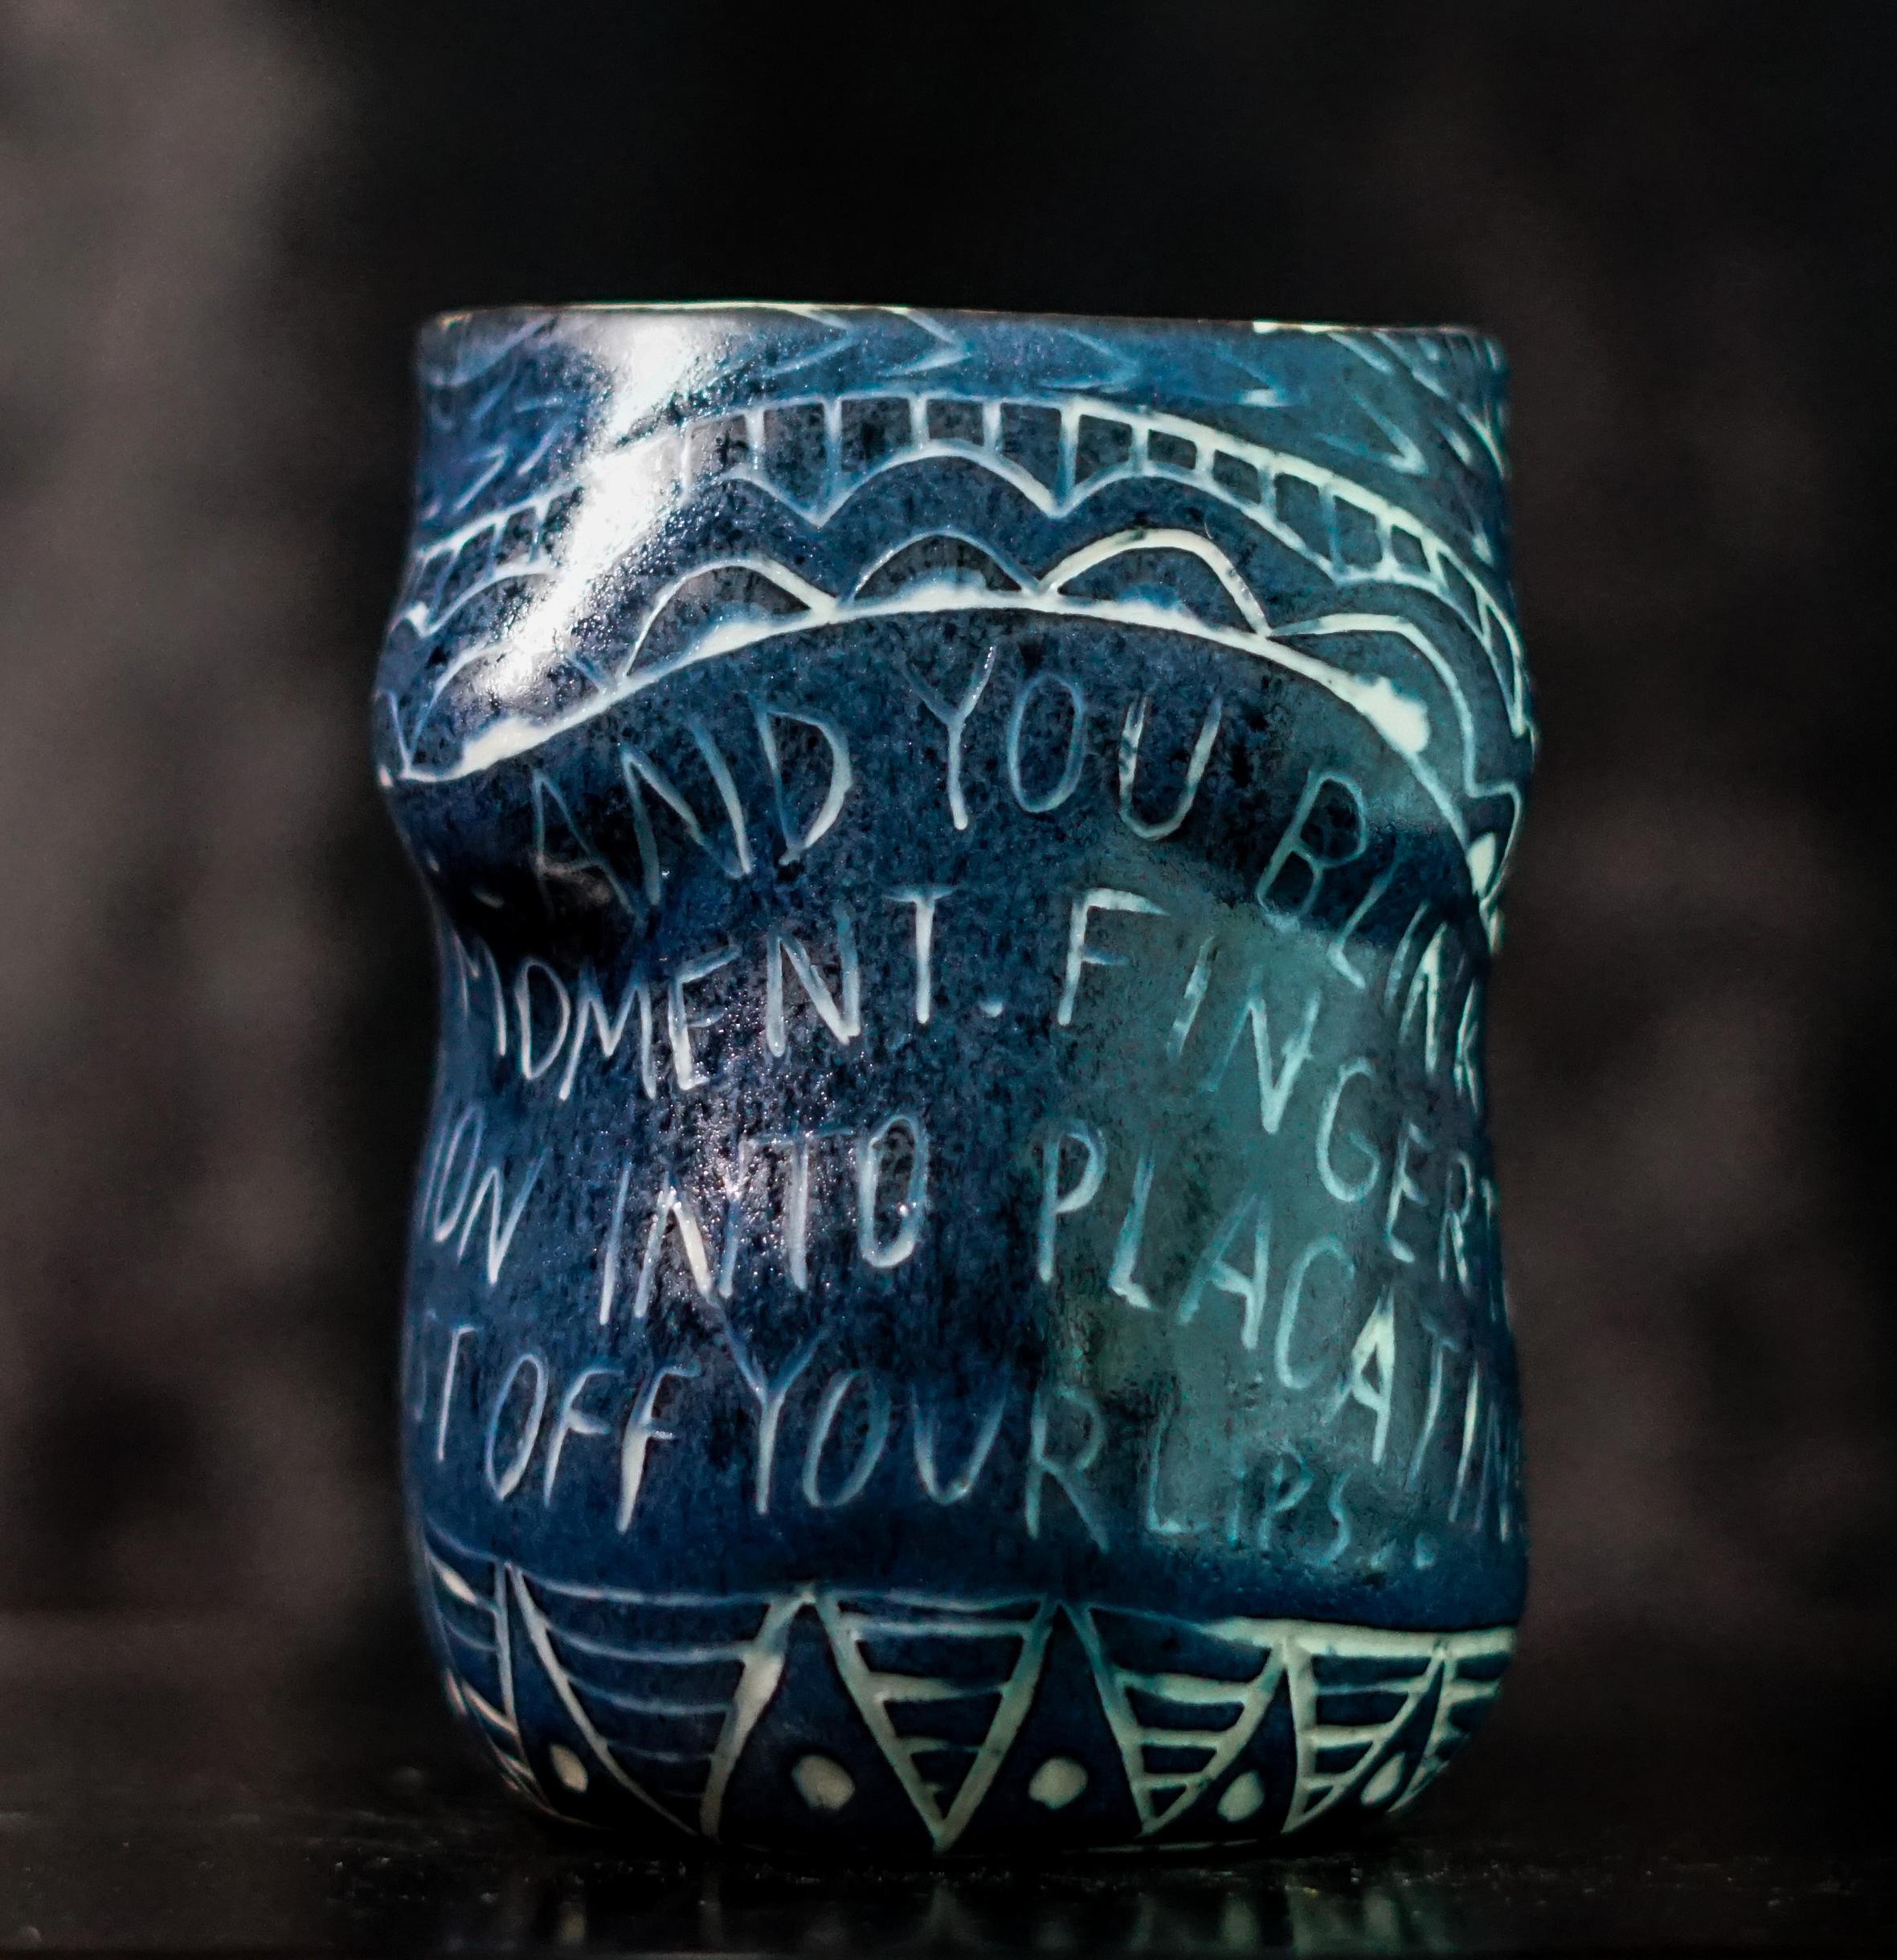 “And You Blink..” Porcelain cup with sgraffito detailing by the artist